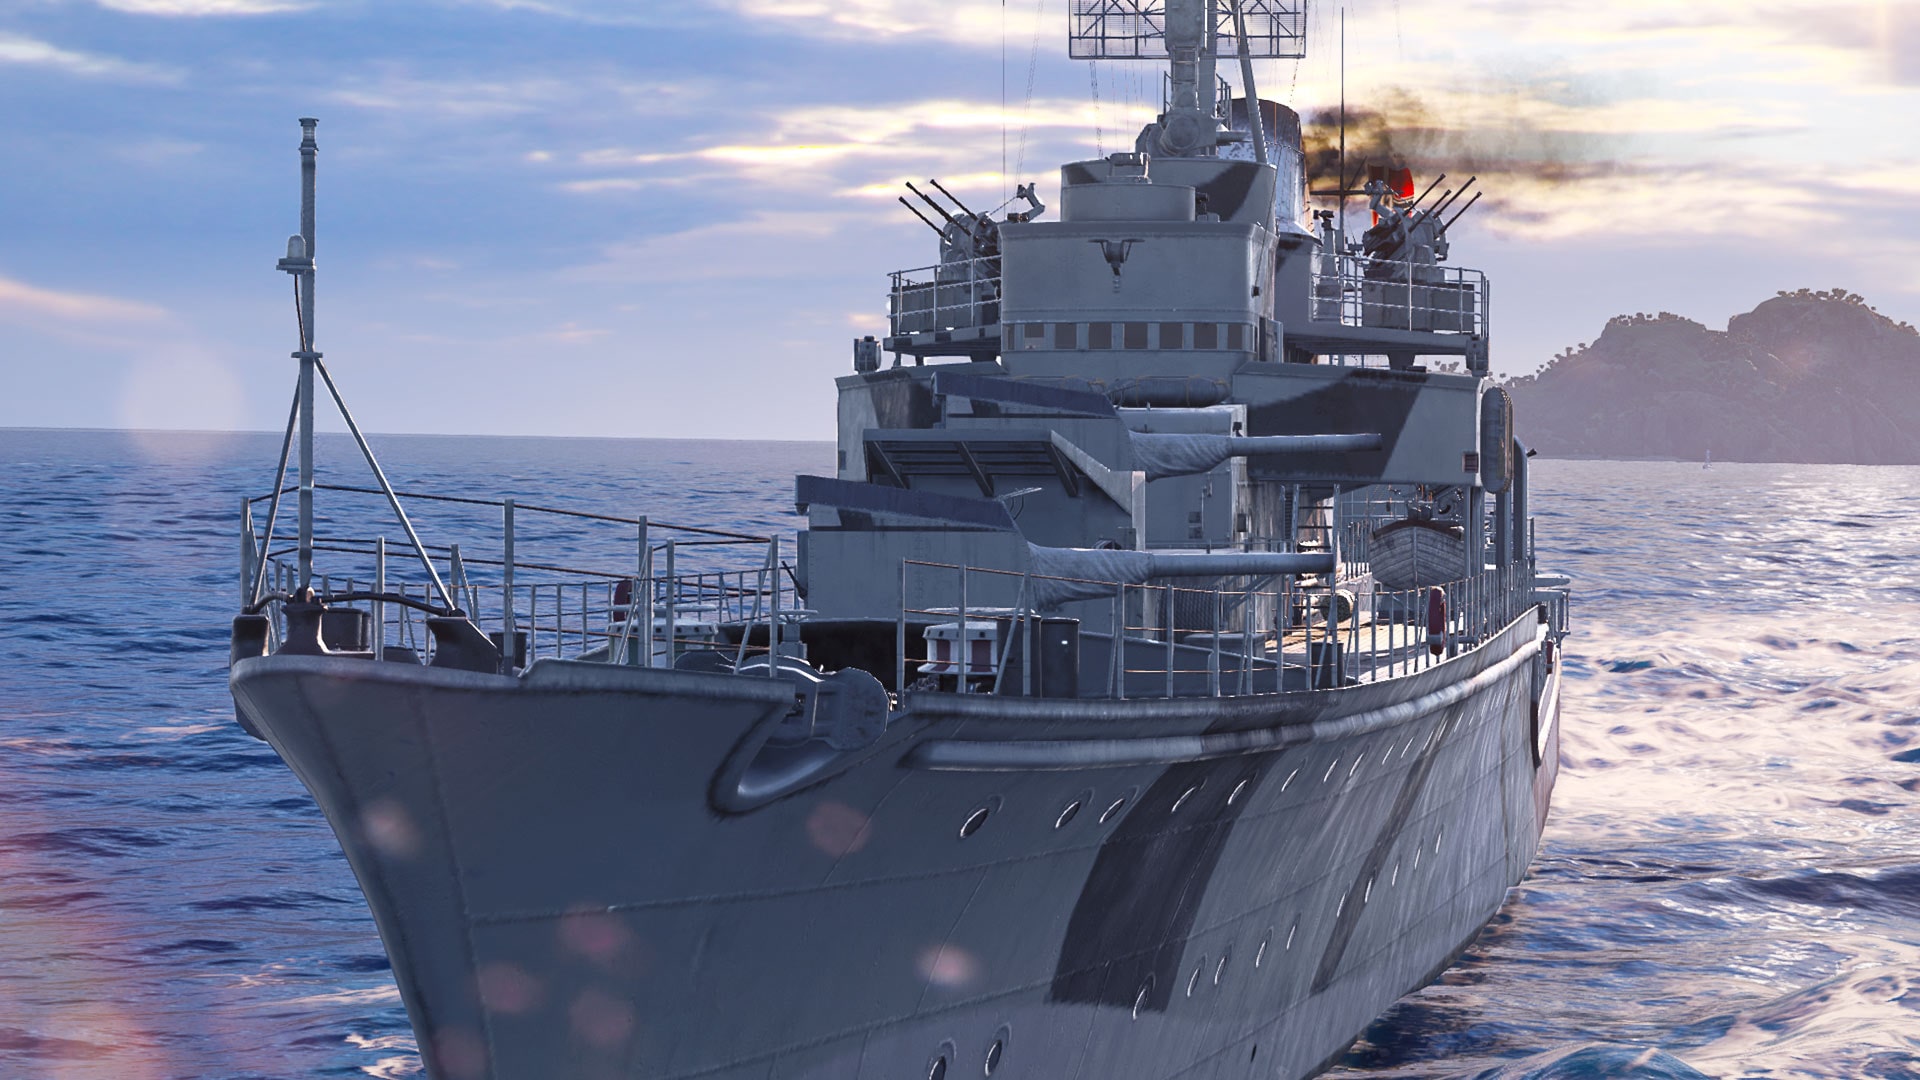 world of warships legends targeting tips and tricks